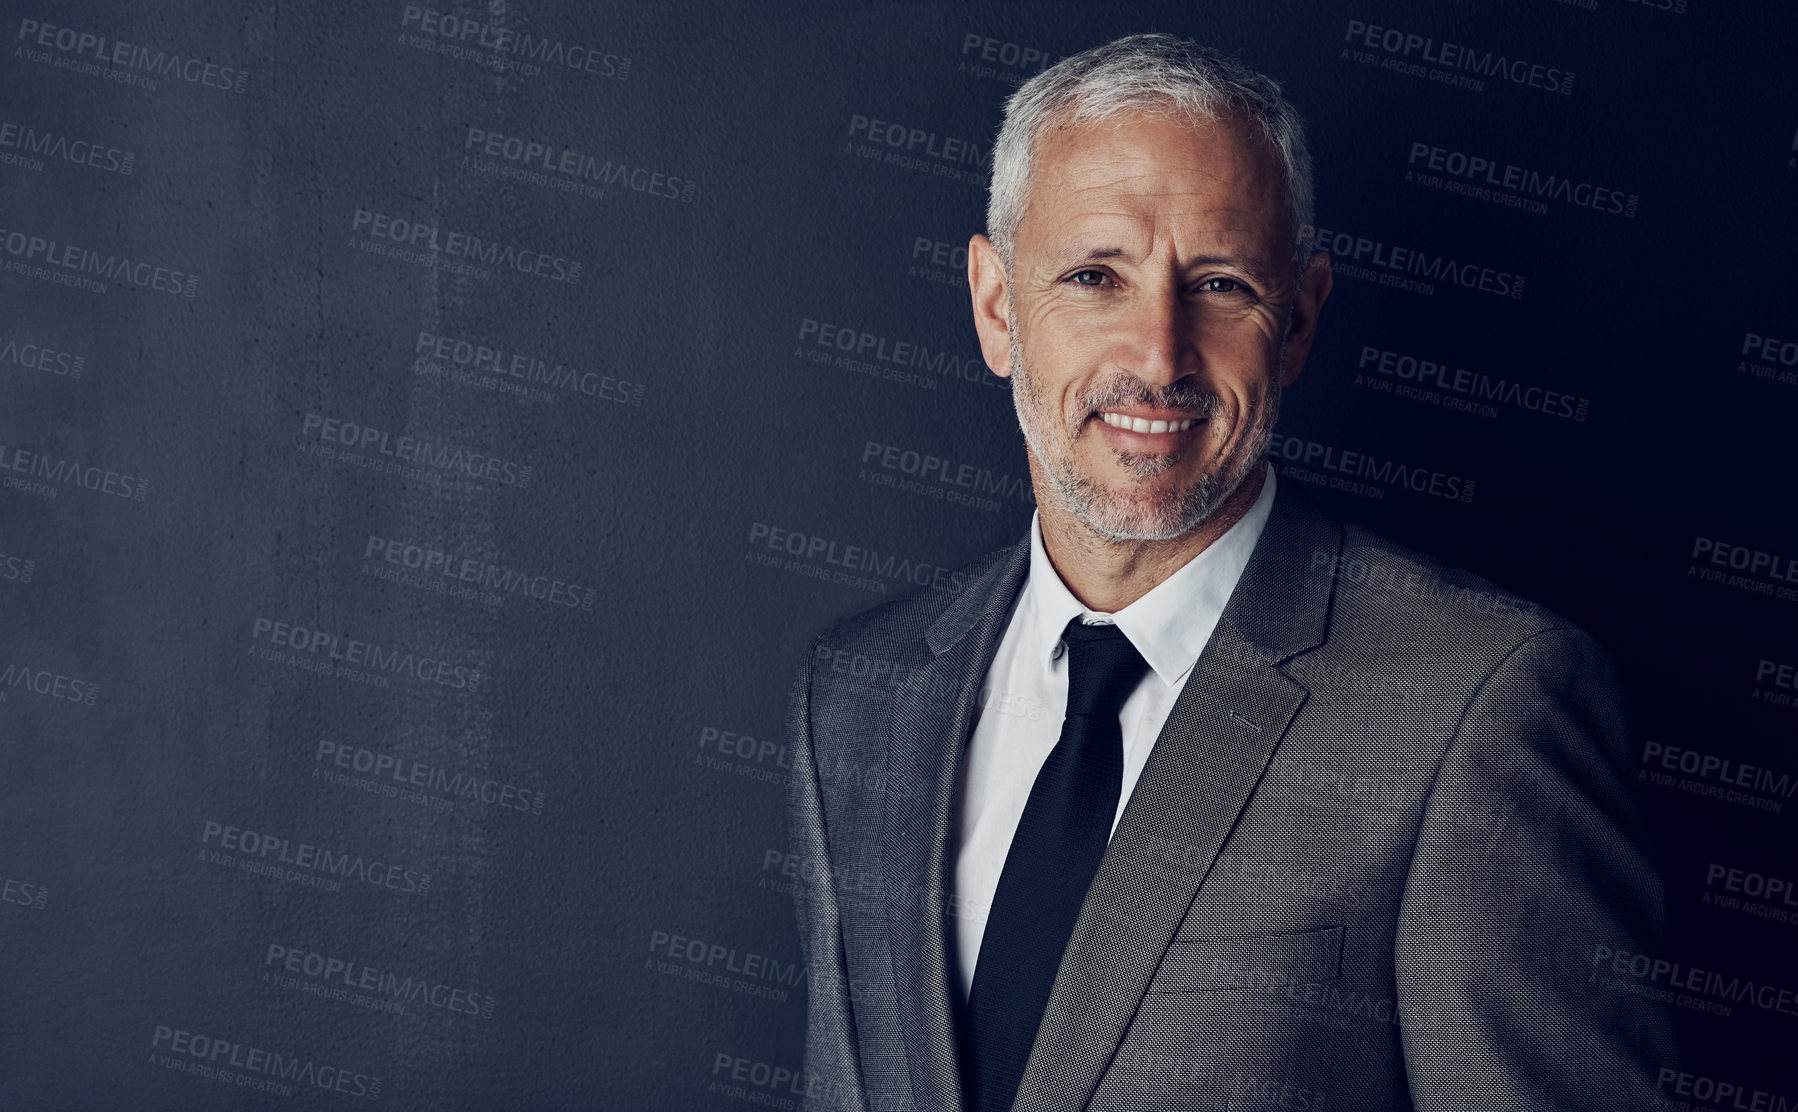 Buy stock photo Mockup, smile and studio portrait of businessman in suit, confidence and pride on dark background. Boss, ceo and business owner with professional career, senior model with executive management job.